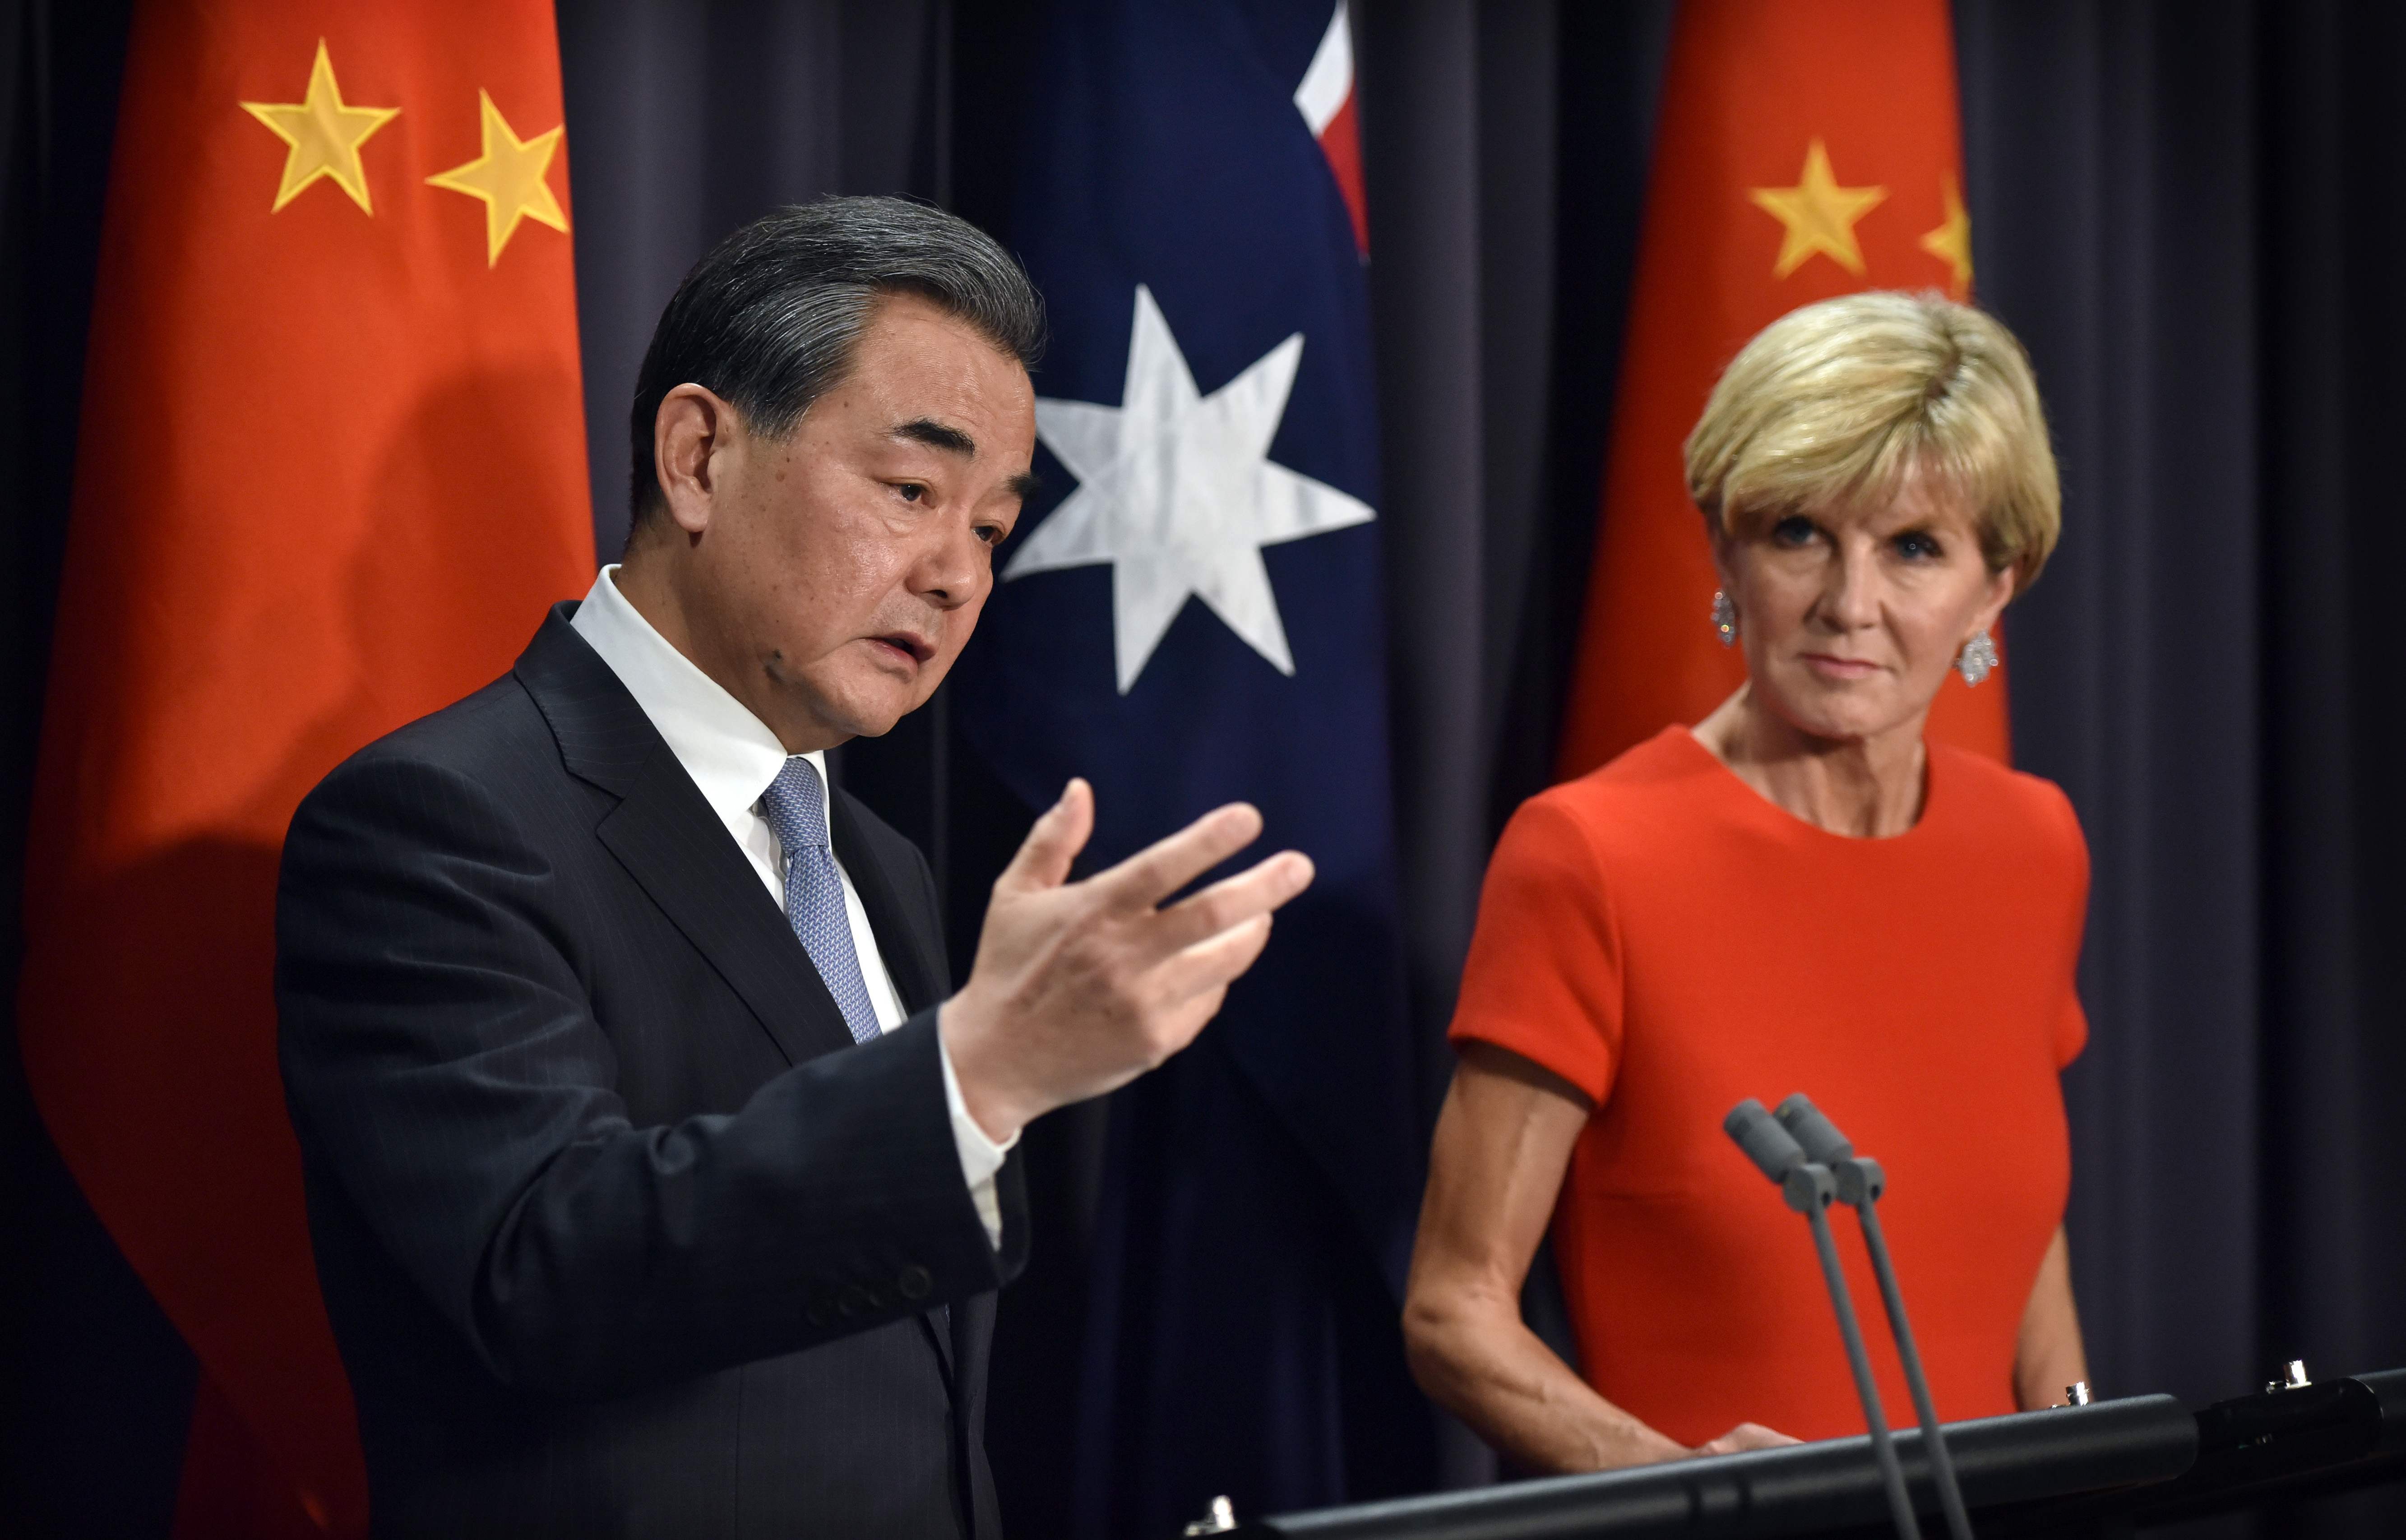 Diplomacy between Beijing and Canberra is at a low point – a sophisticated approach by Australia is required